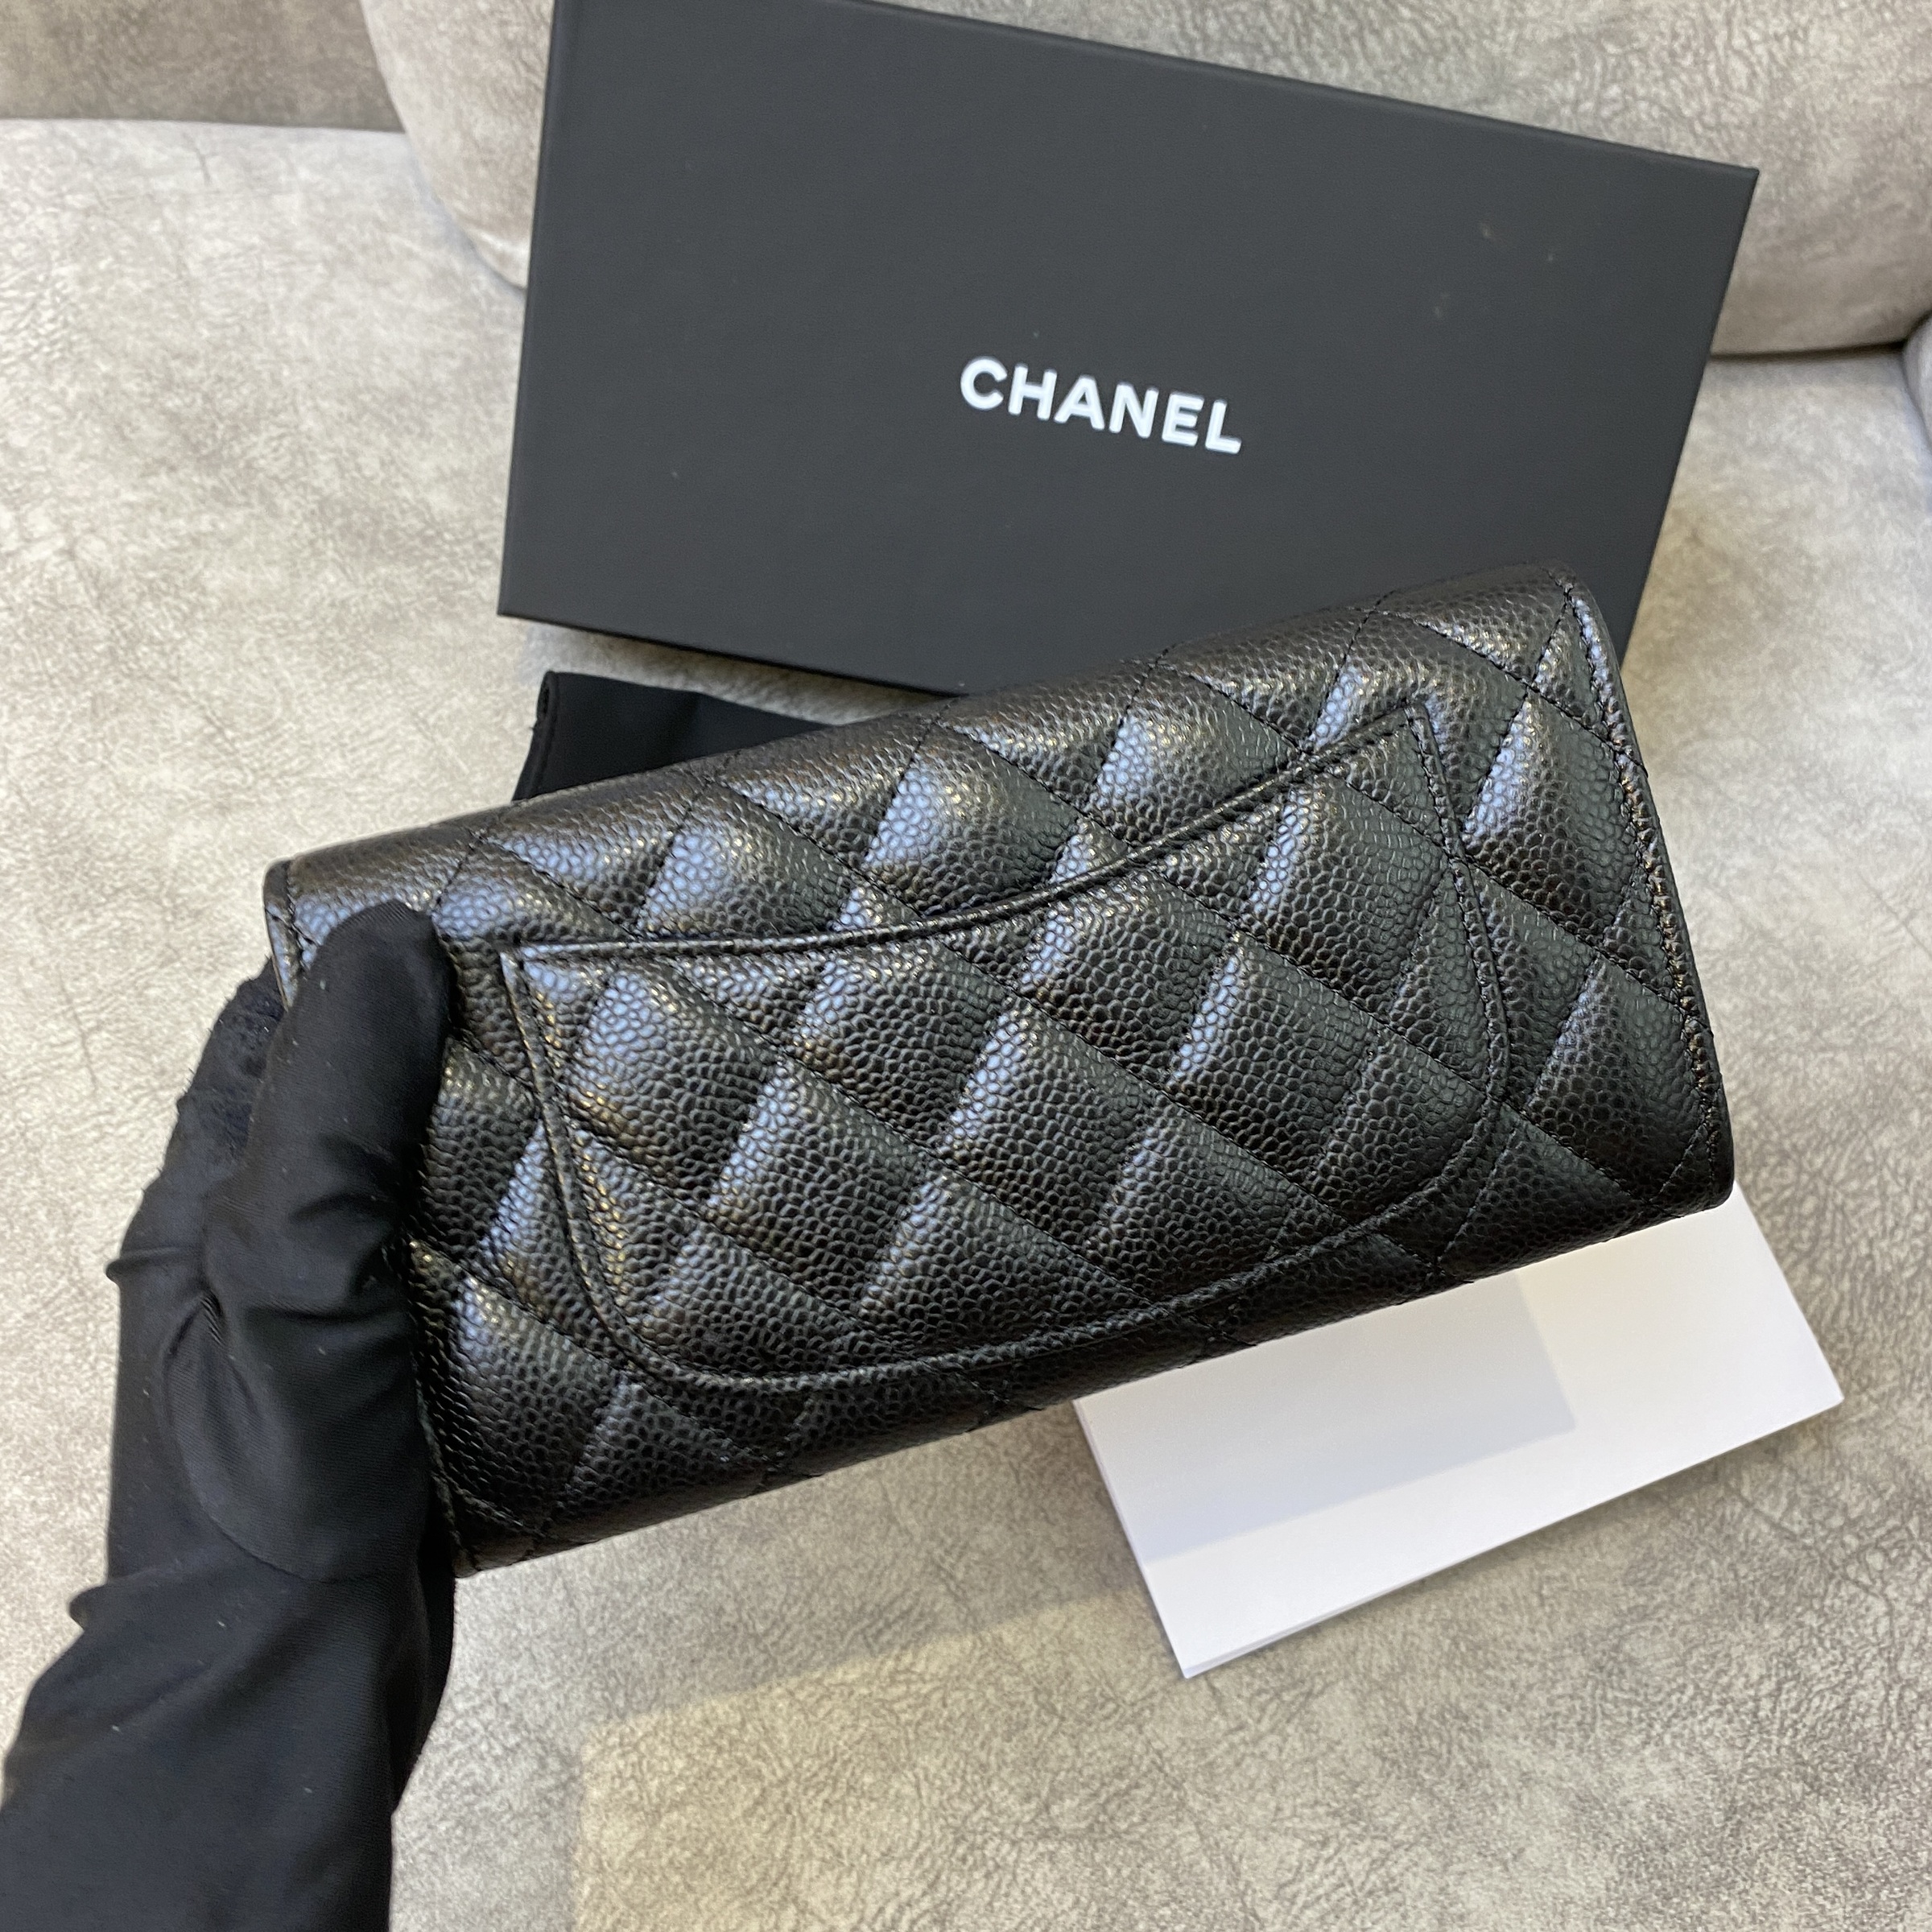 Chanel – Lbite Luxury Branded - Your Trusted Luxury Expert